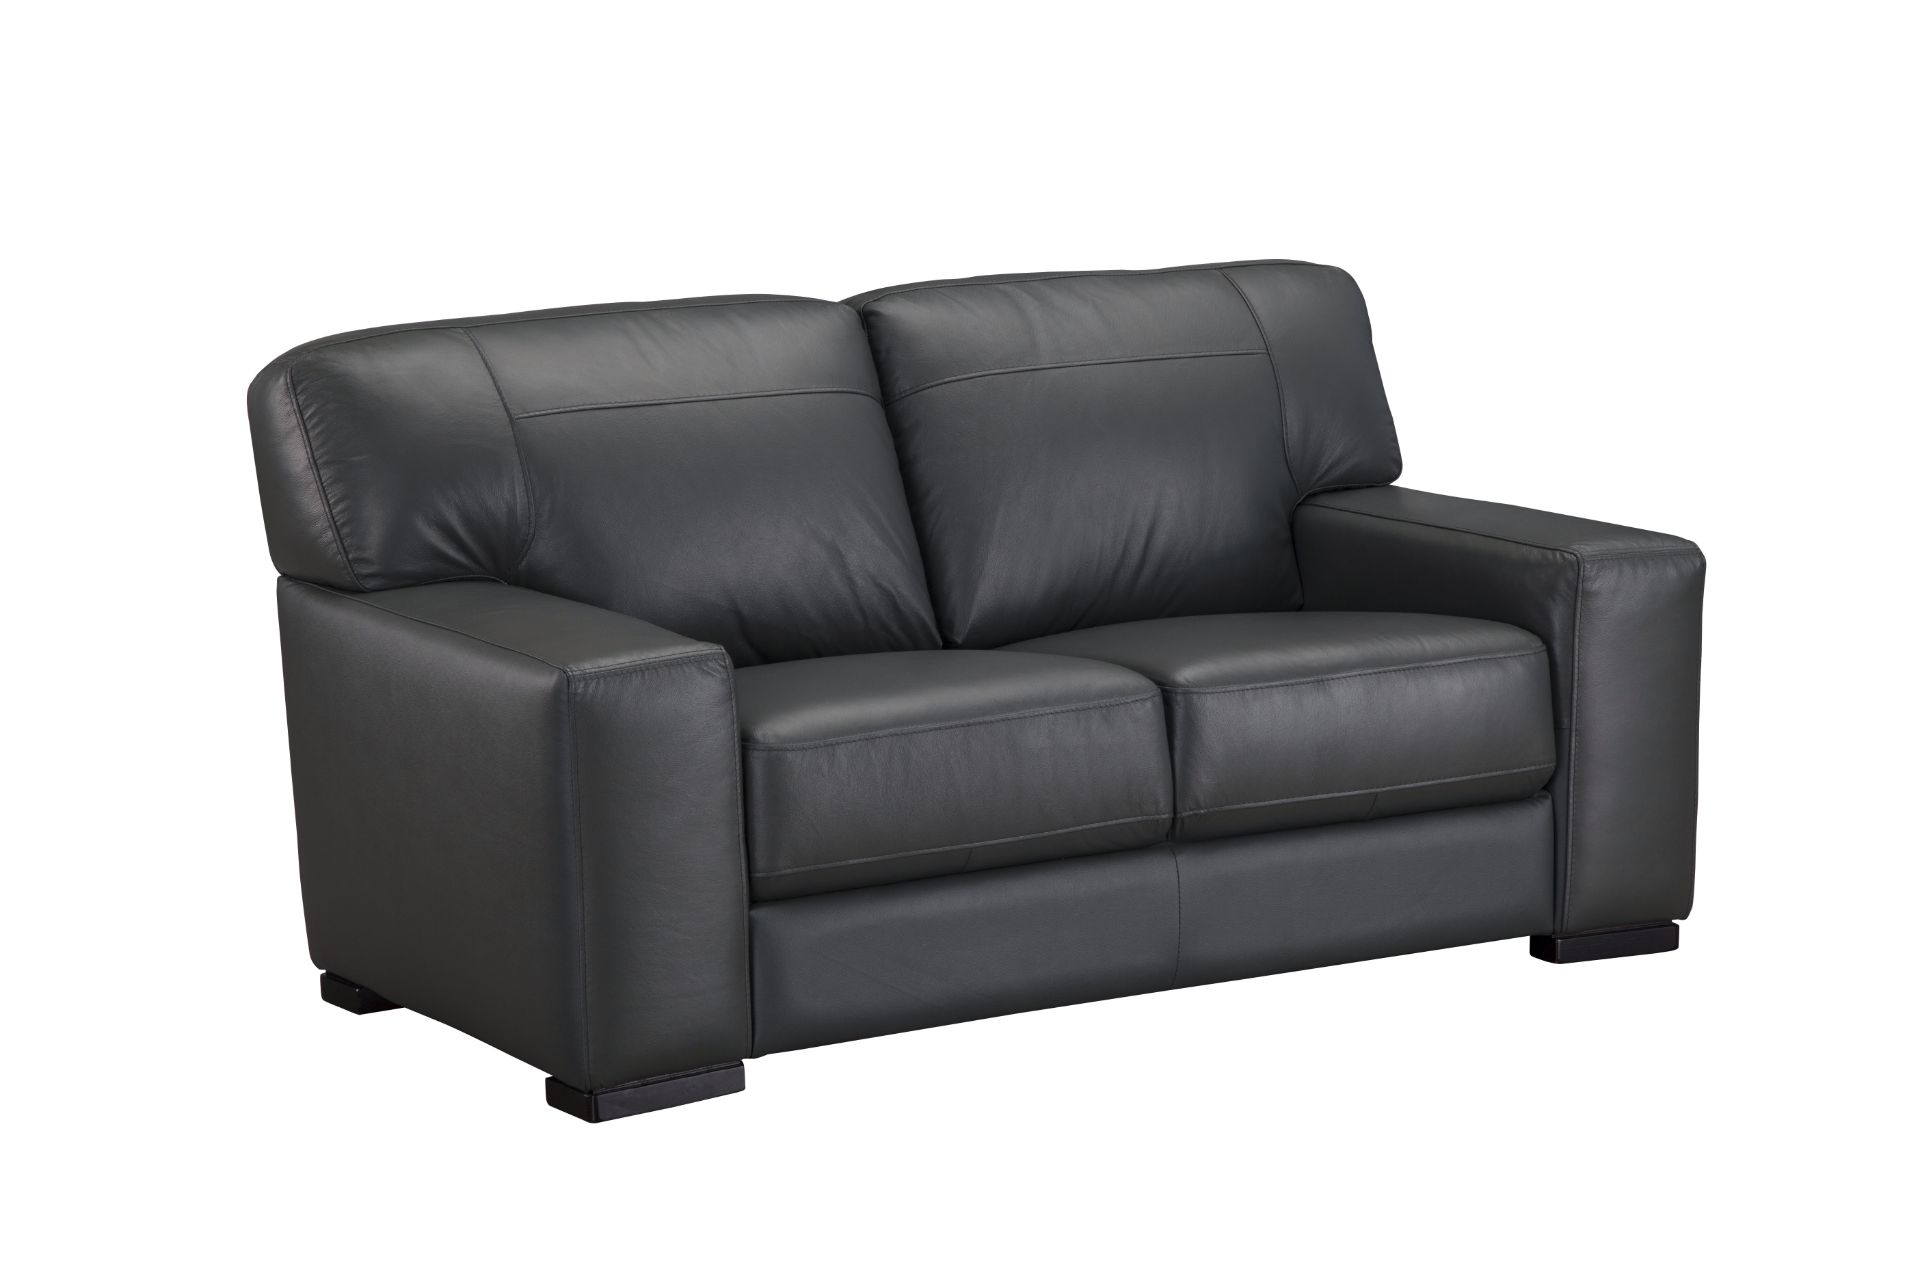 1x Brand New Fulham 2 Seater Static-Charcoal Leather Sofa & PVC Outer - Image 2 of 2